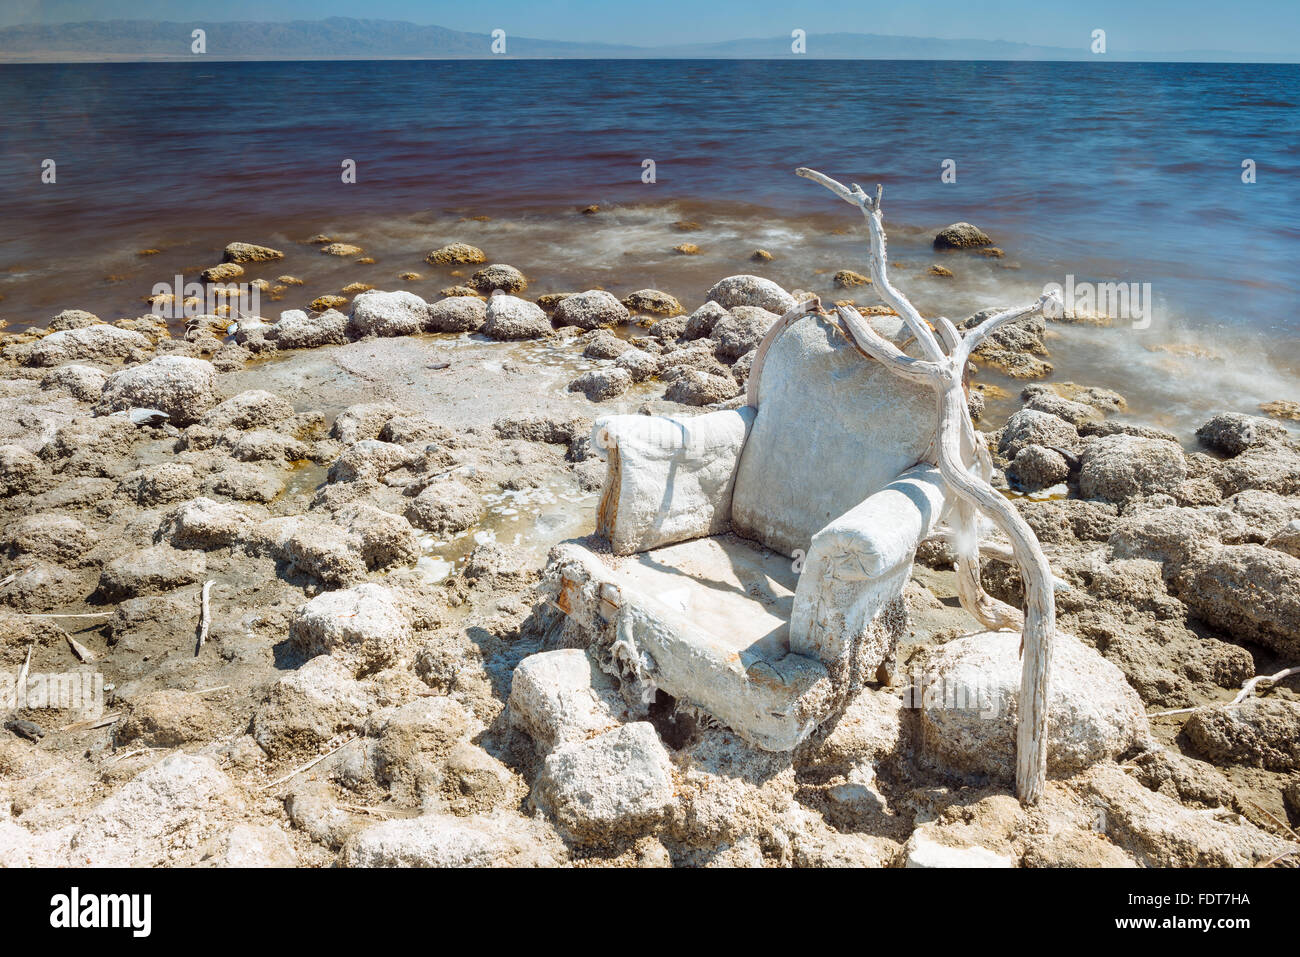 A discarded chair on the western shore of the Salton Sea, California Stock Photo